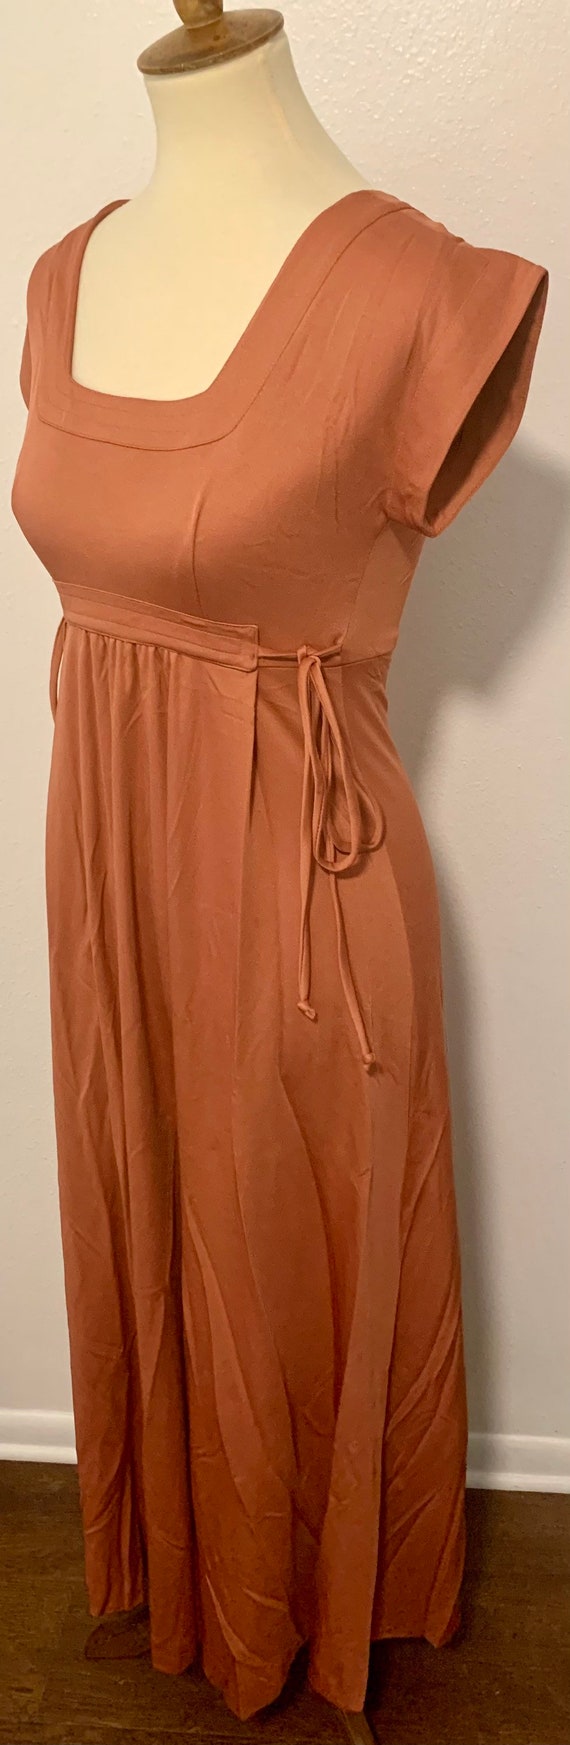 Vintage 70s Rosy Pink Dress with Side Ties - image 7